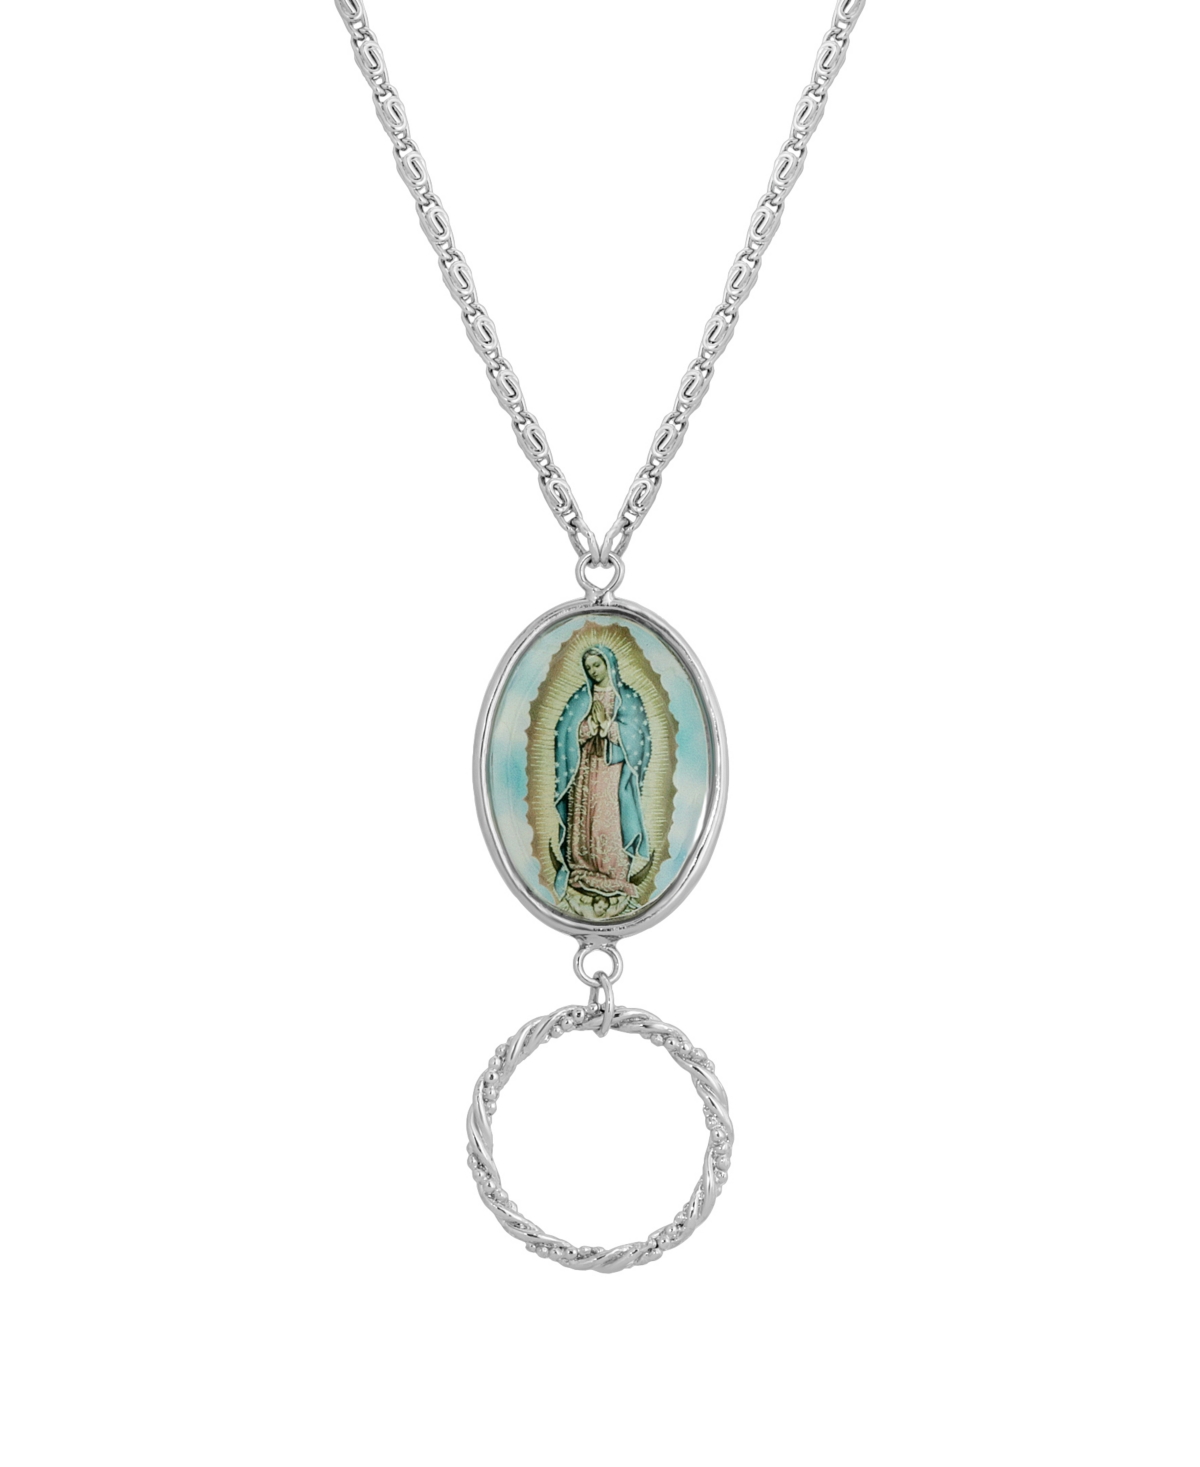 Silver-Tone Oval Lady of Guadalupe Eye Glass Holder Necklace - Blue